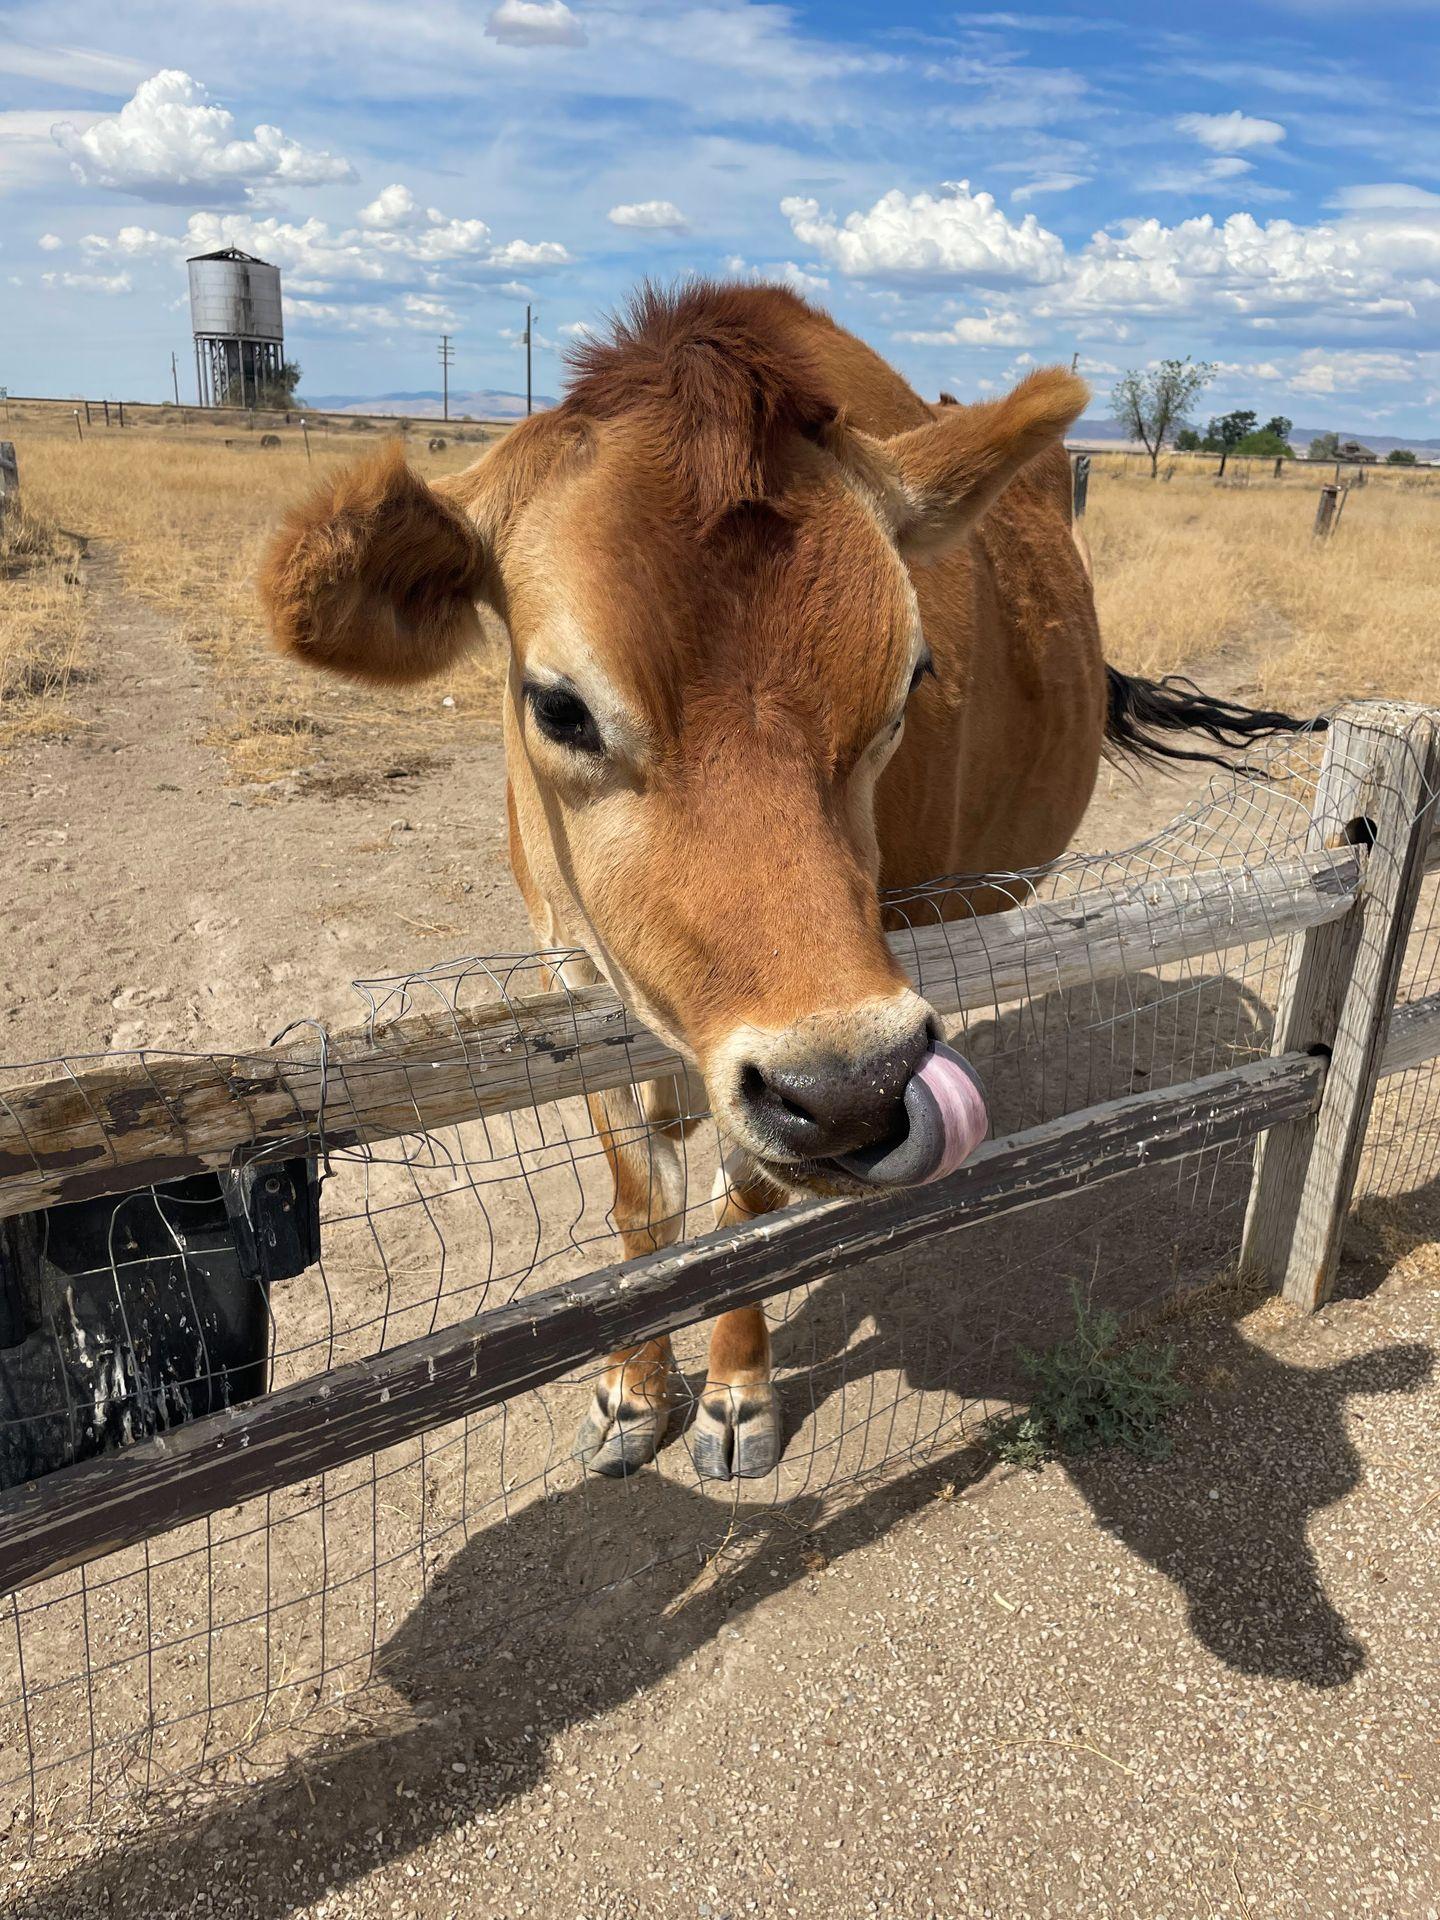 A friendly cow sticking her tongue out at the Big Idaho Potato Hotel.